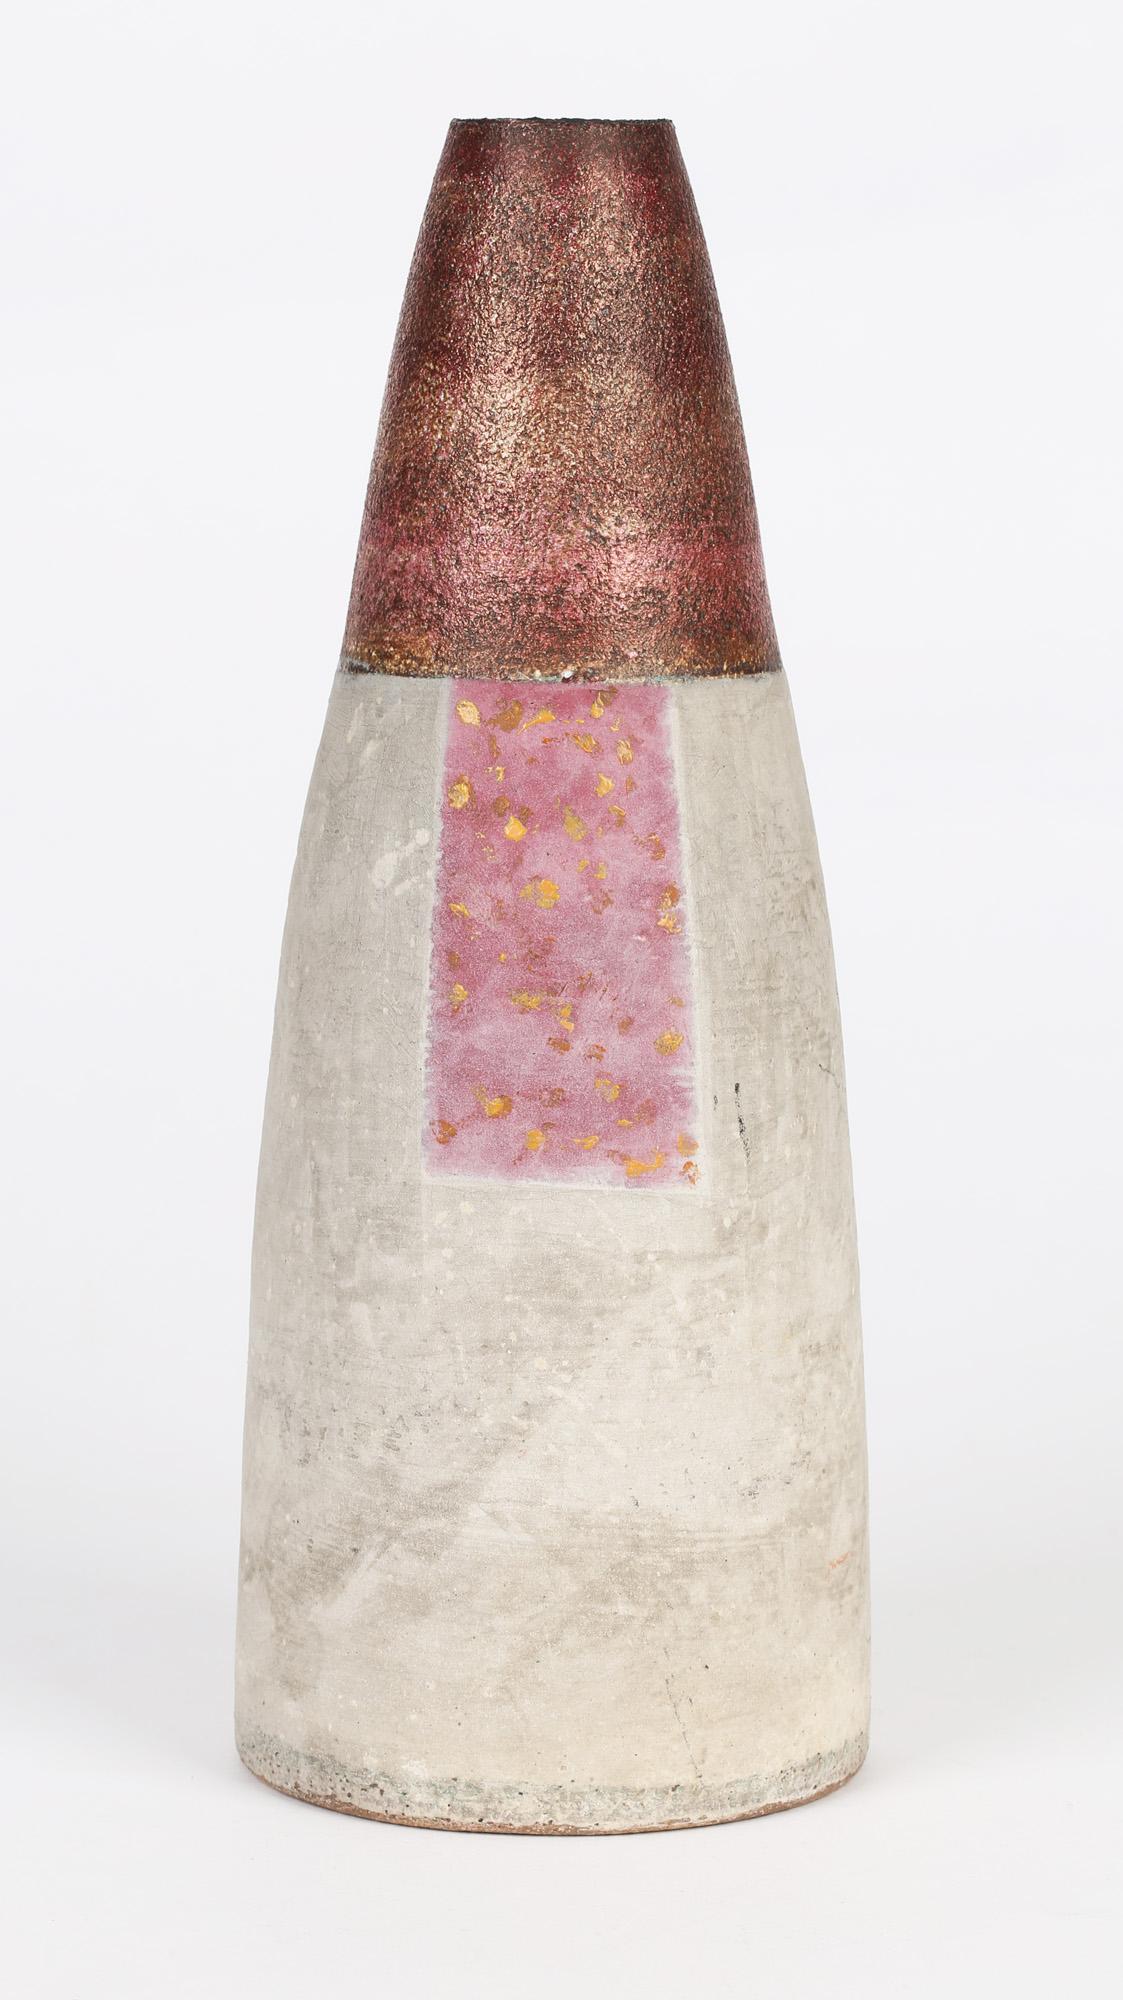 A stylish vintage British studio pottery stoneware vase of simple graduated rounded shape decorated in grey, pink and textured glazes by renowned potter Robin Welch and dating from the 20th century. The tall vase stands on a wide rounded foot and